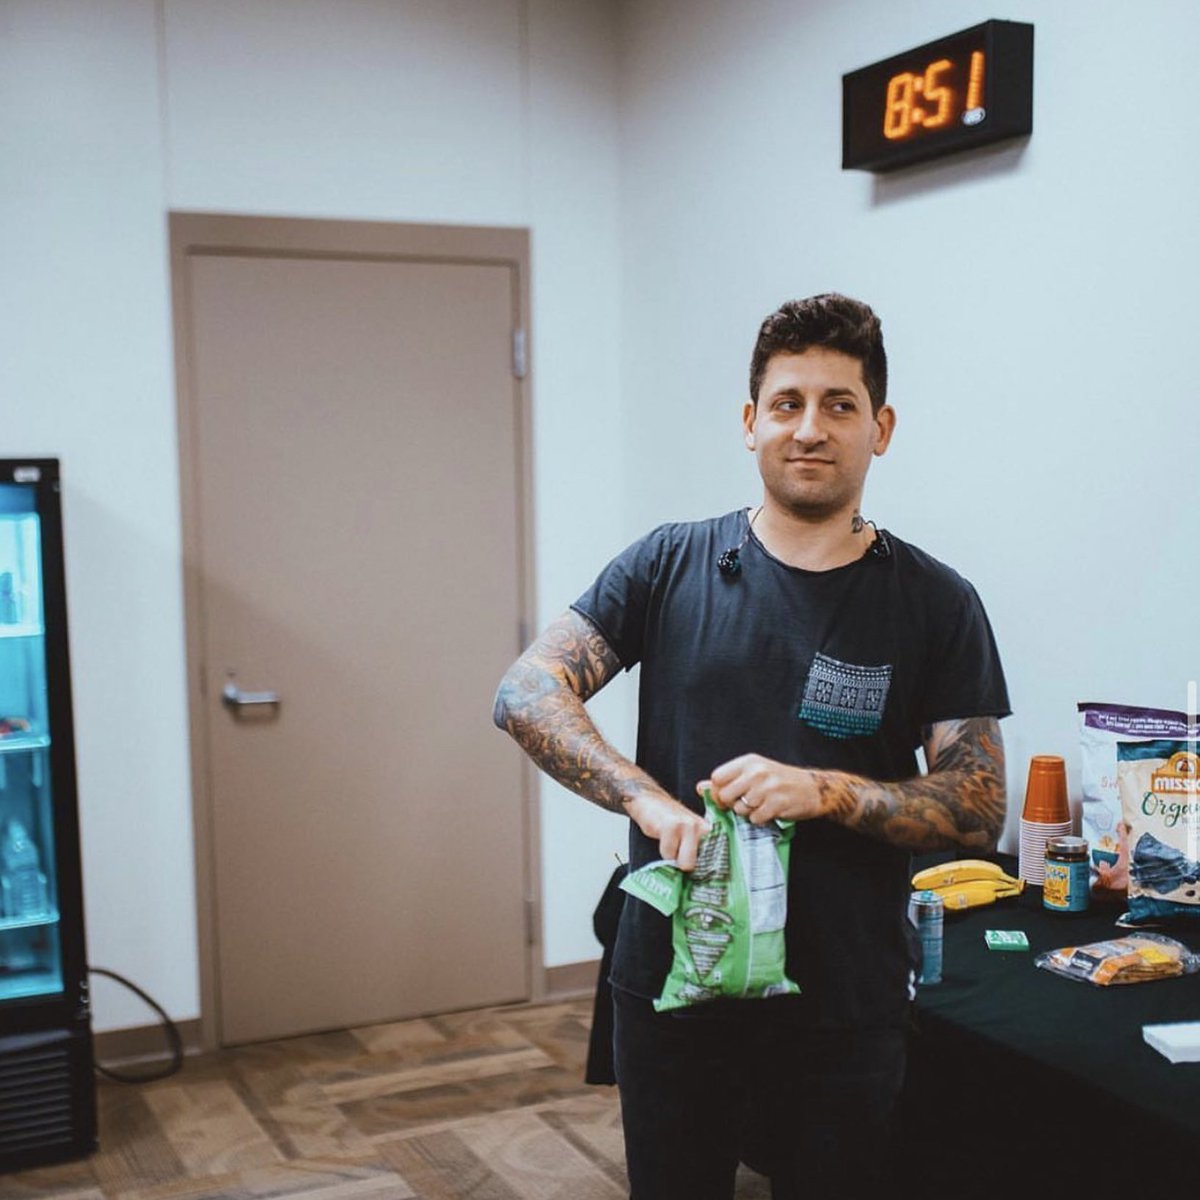 8:51 is the 4:20 of eating chips 5 minutes before going on stage. 📸 @ElliottIngham